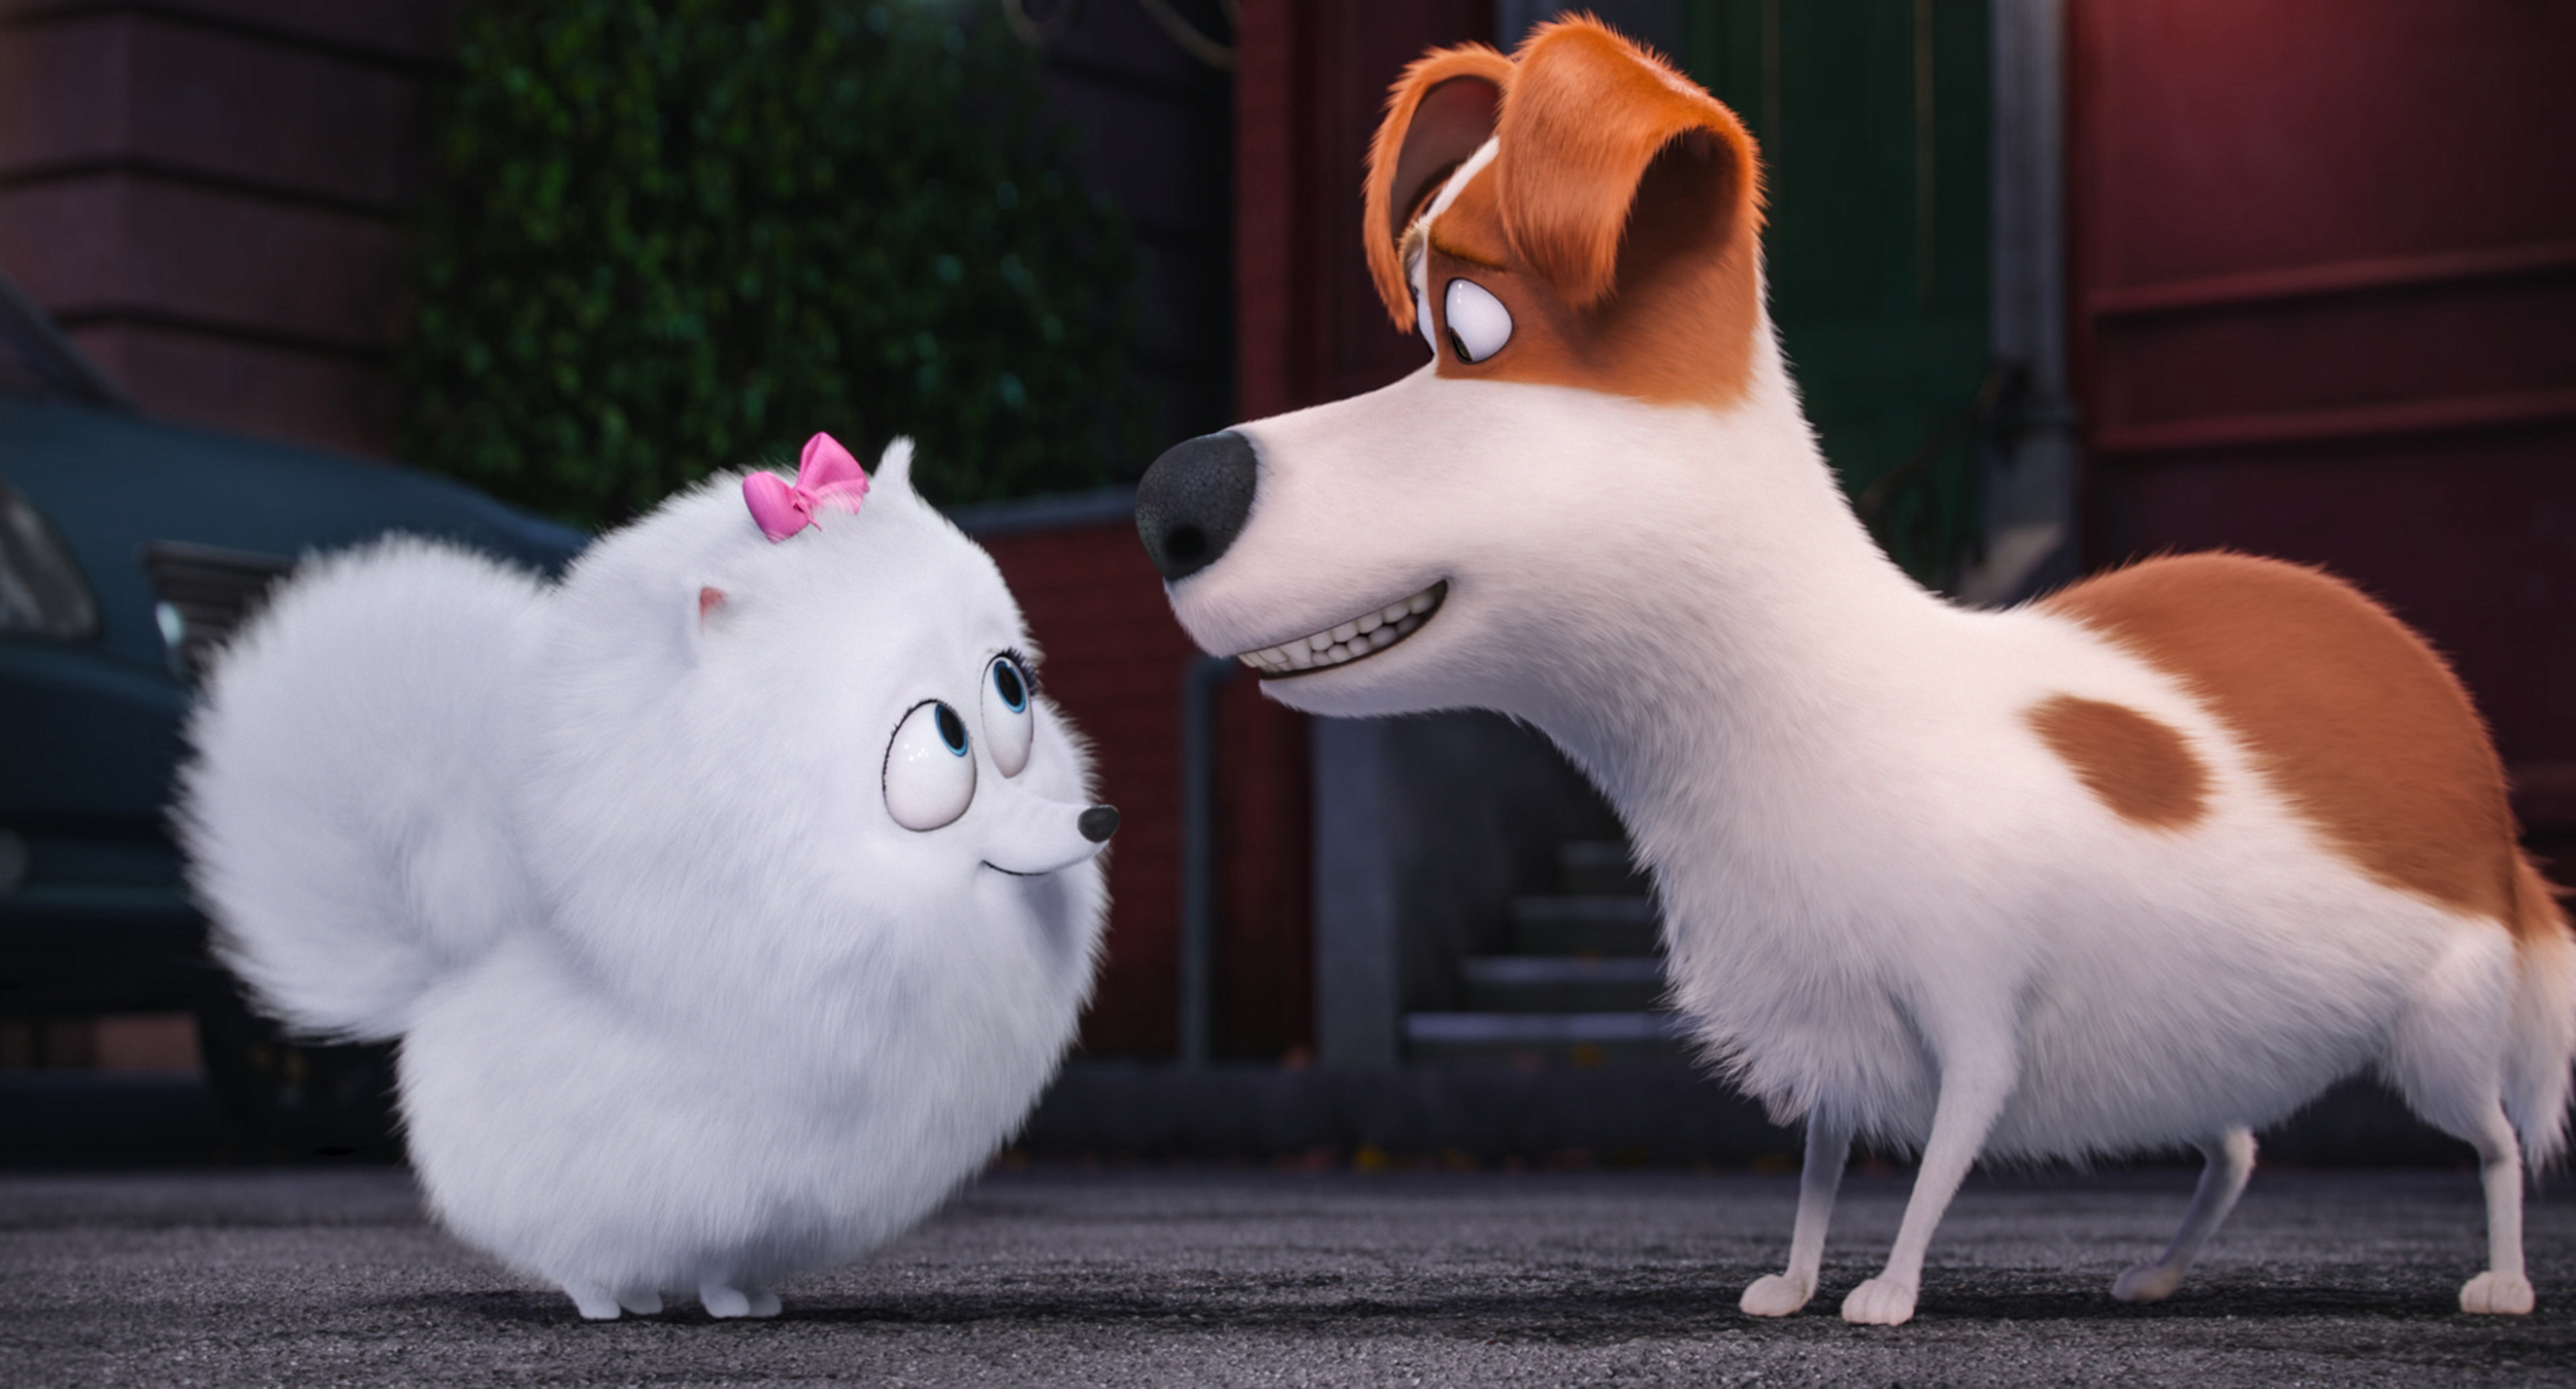 Gidget, voiced by Jenny Slate, left, and Max, voiced by Louis C.K., right, in <i>The Secret Lives of Pets</i>. (Illumination Entertainment and Universal Pictures/AP)